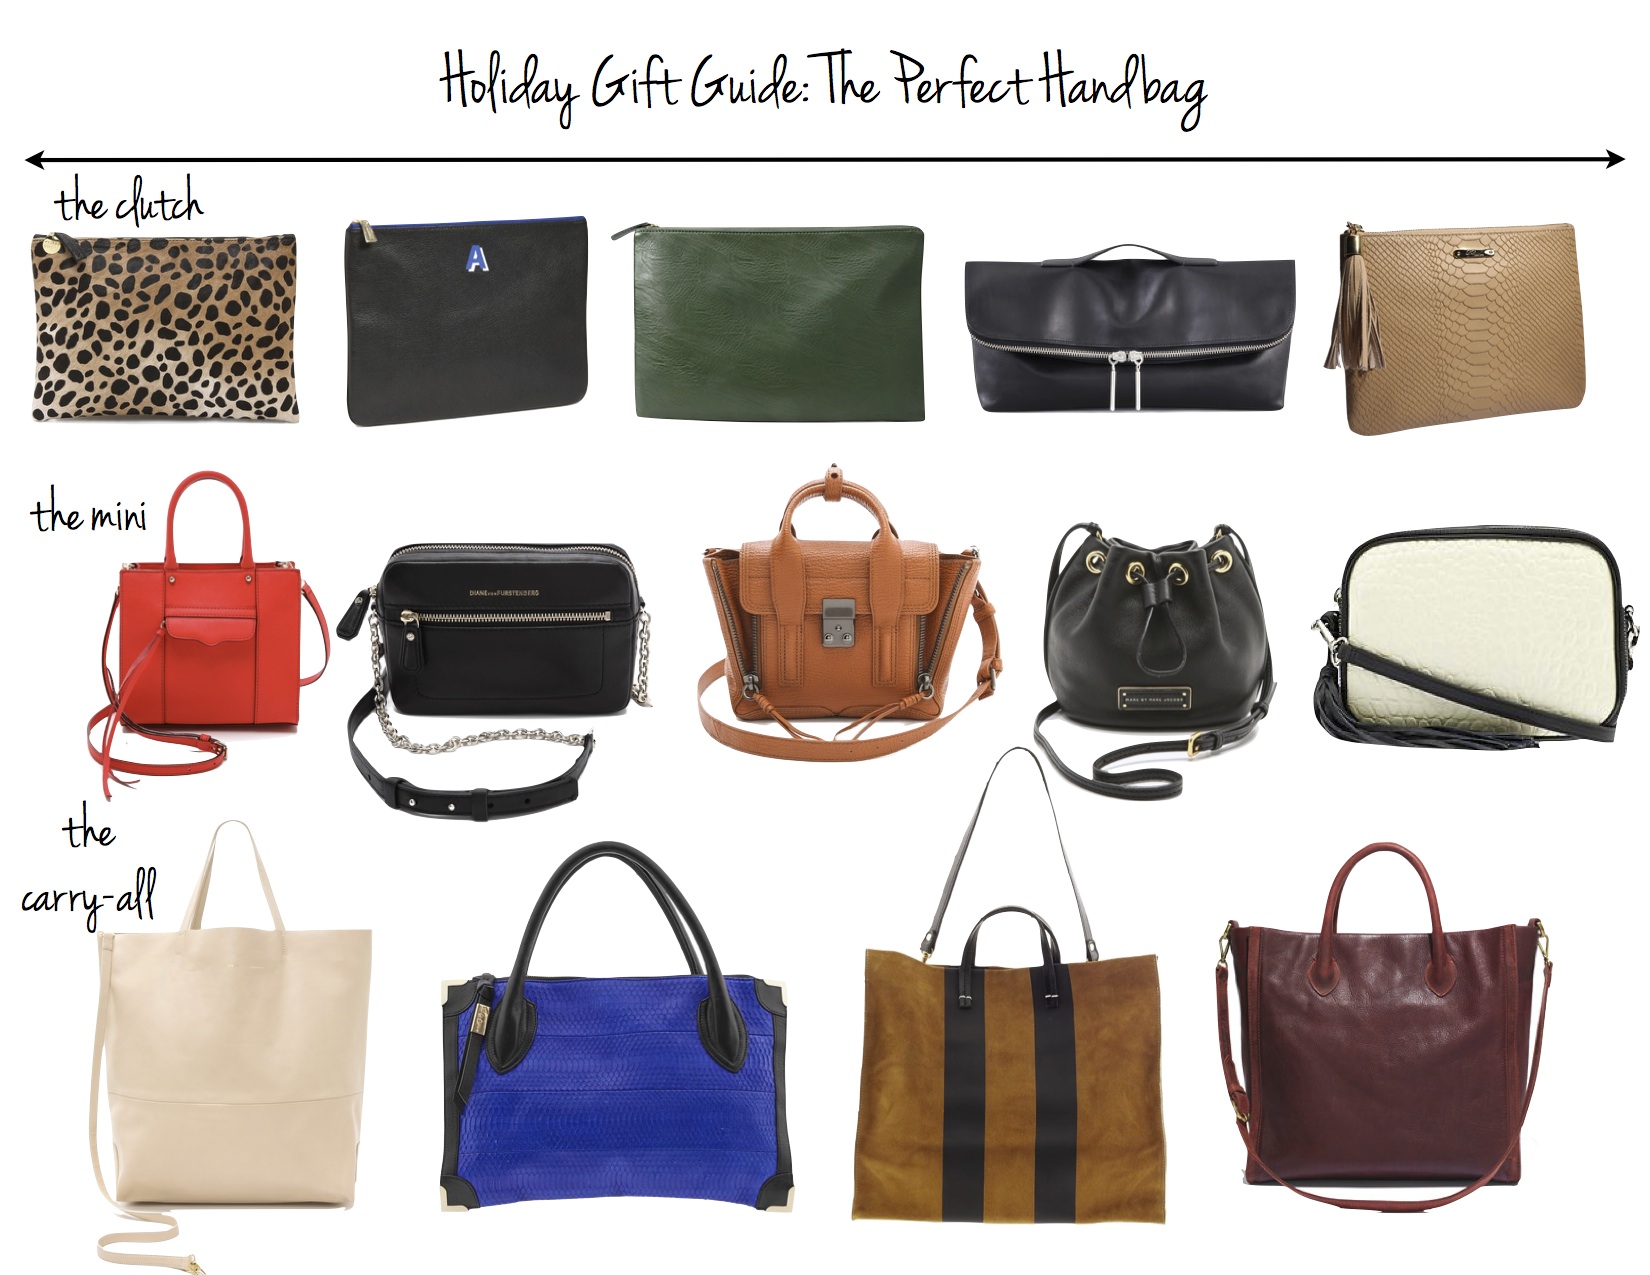 A Guide to Select The Perfect Leather Purse for Every Outfit